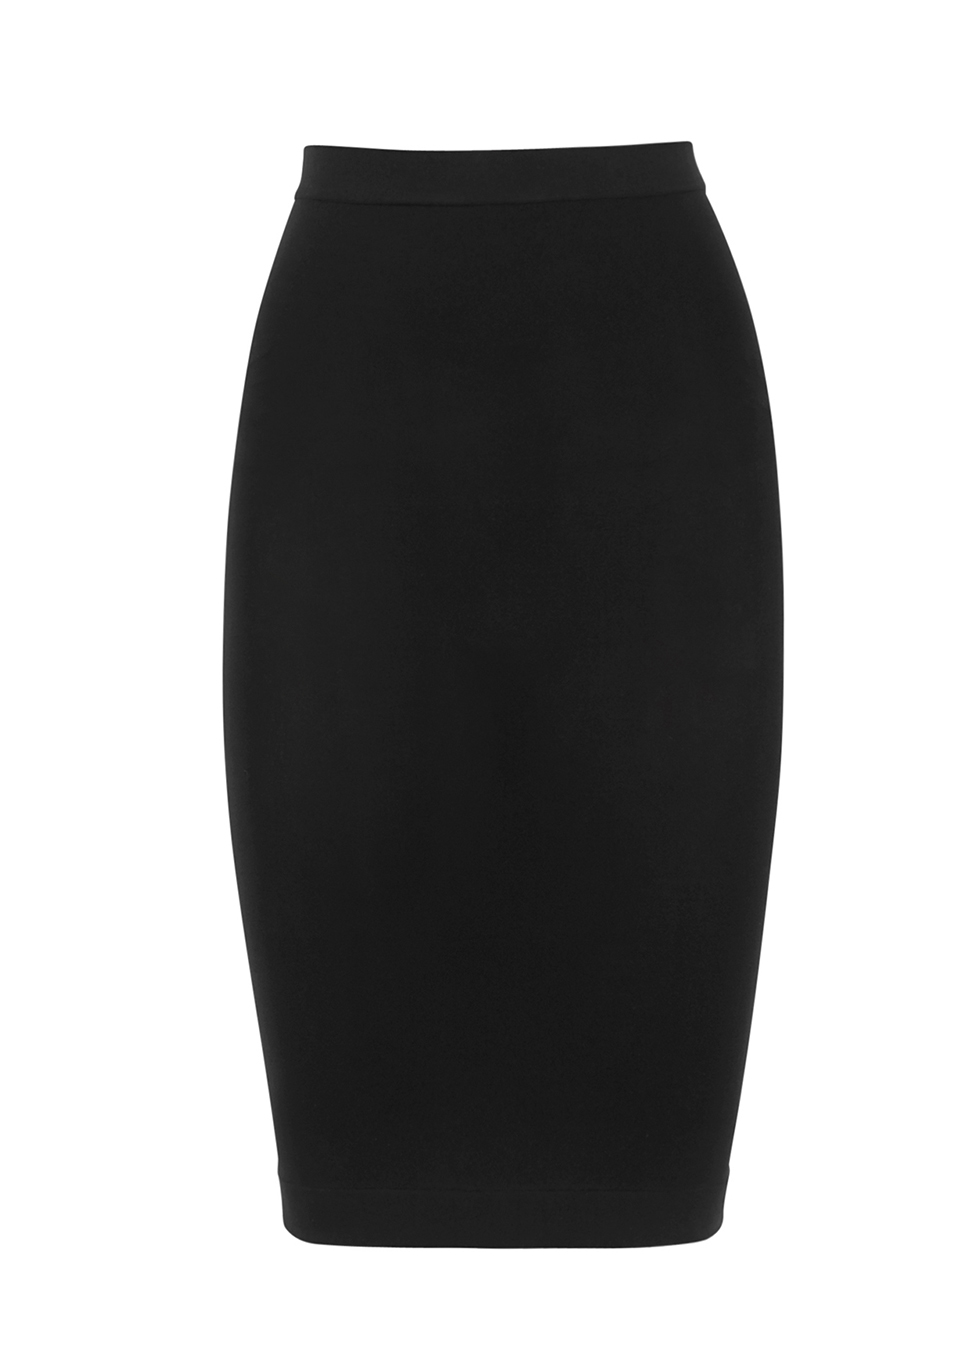 Wolford Individual Nature black forming skirt Sale At 59% Discount ...